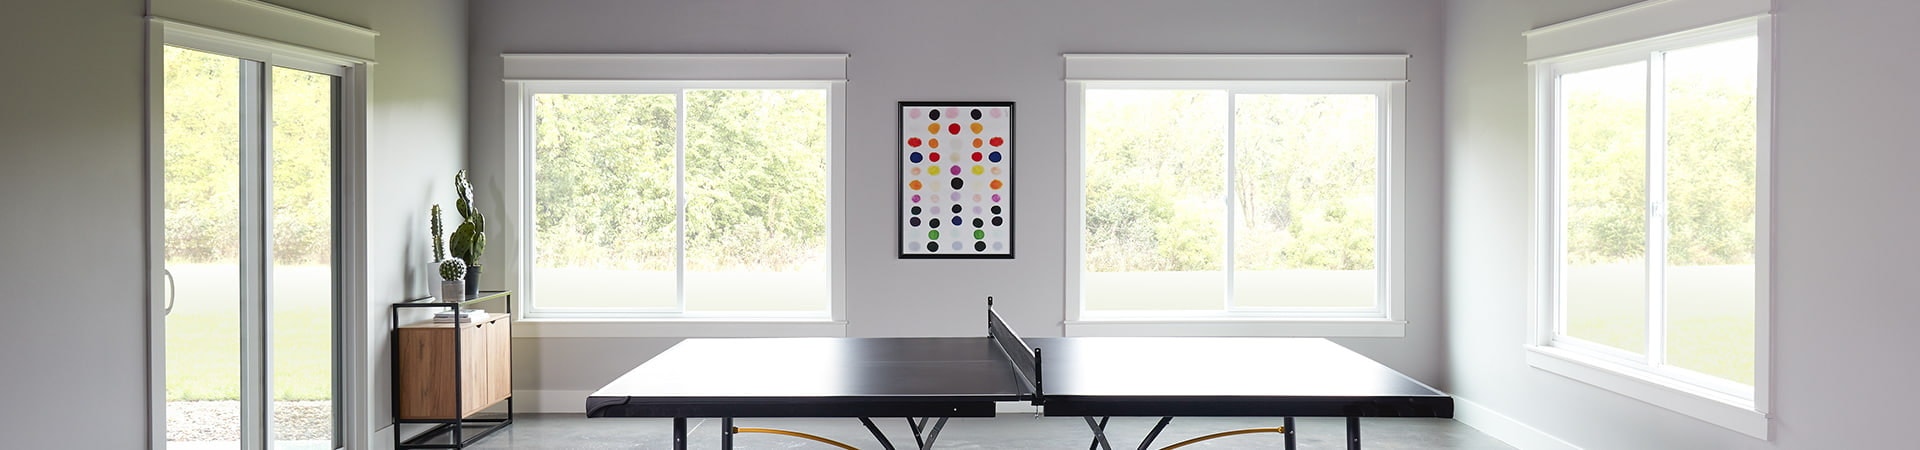 250 series sliding windows in a family rec room ping pong table